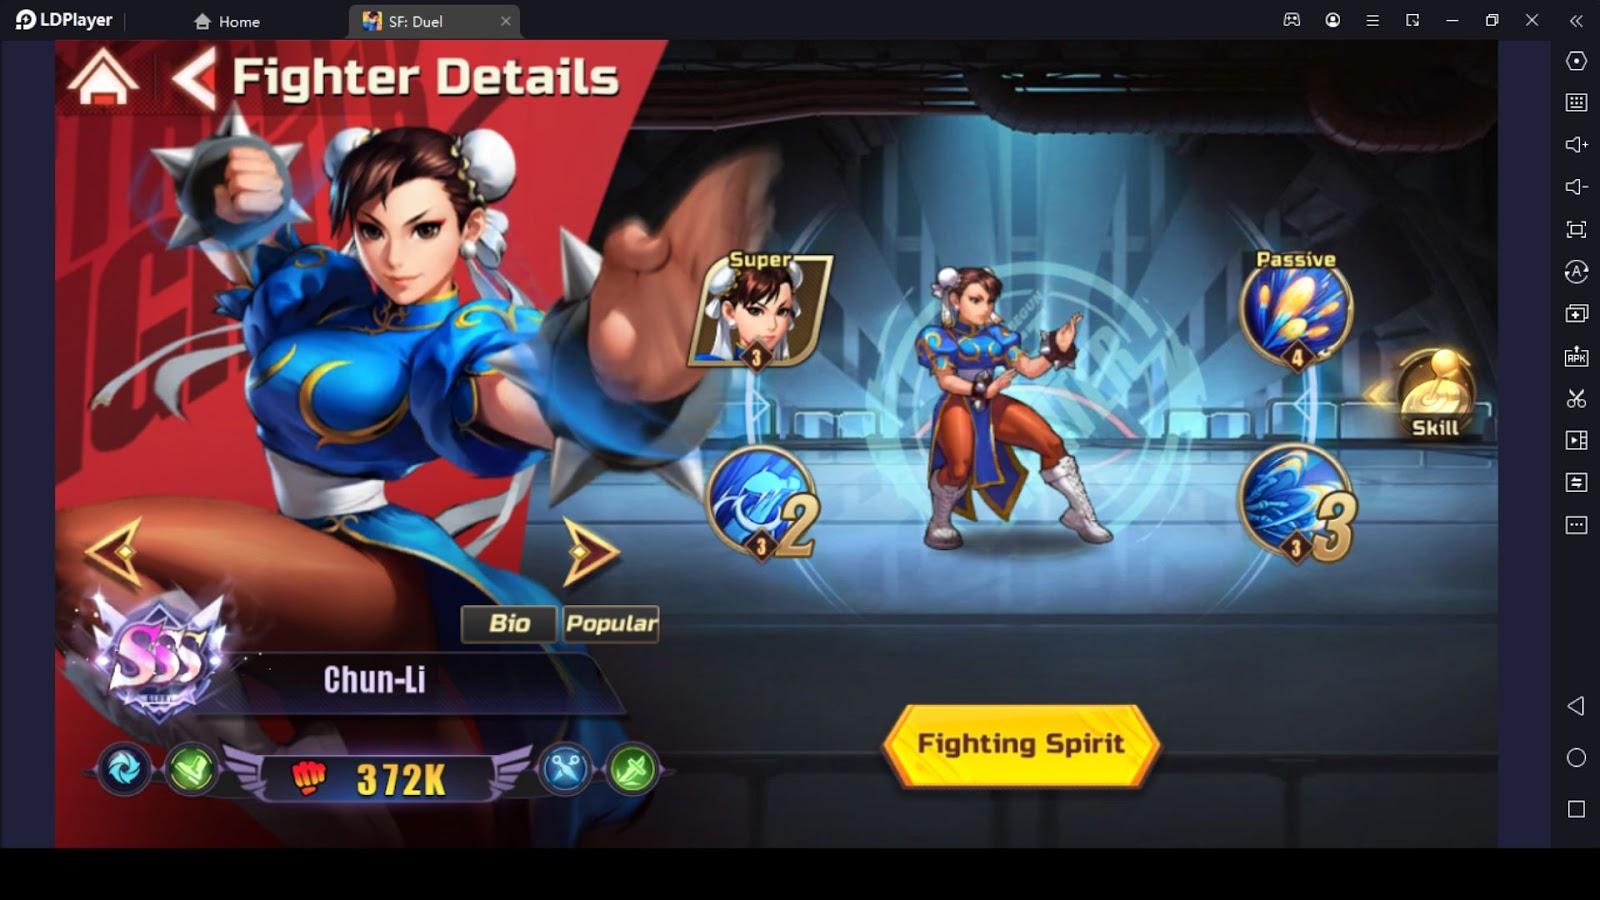 Street Fighter: Duel Review: A mobile reminder of SF IV's greatness